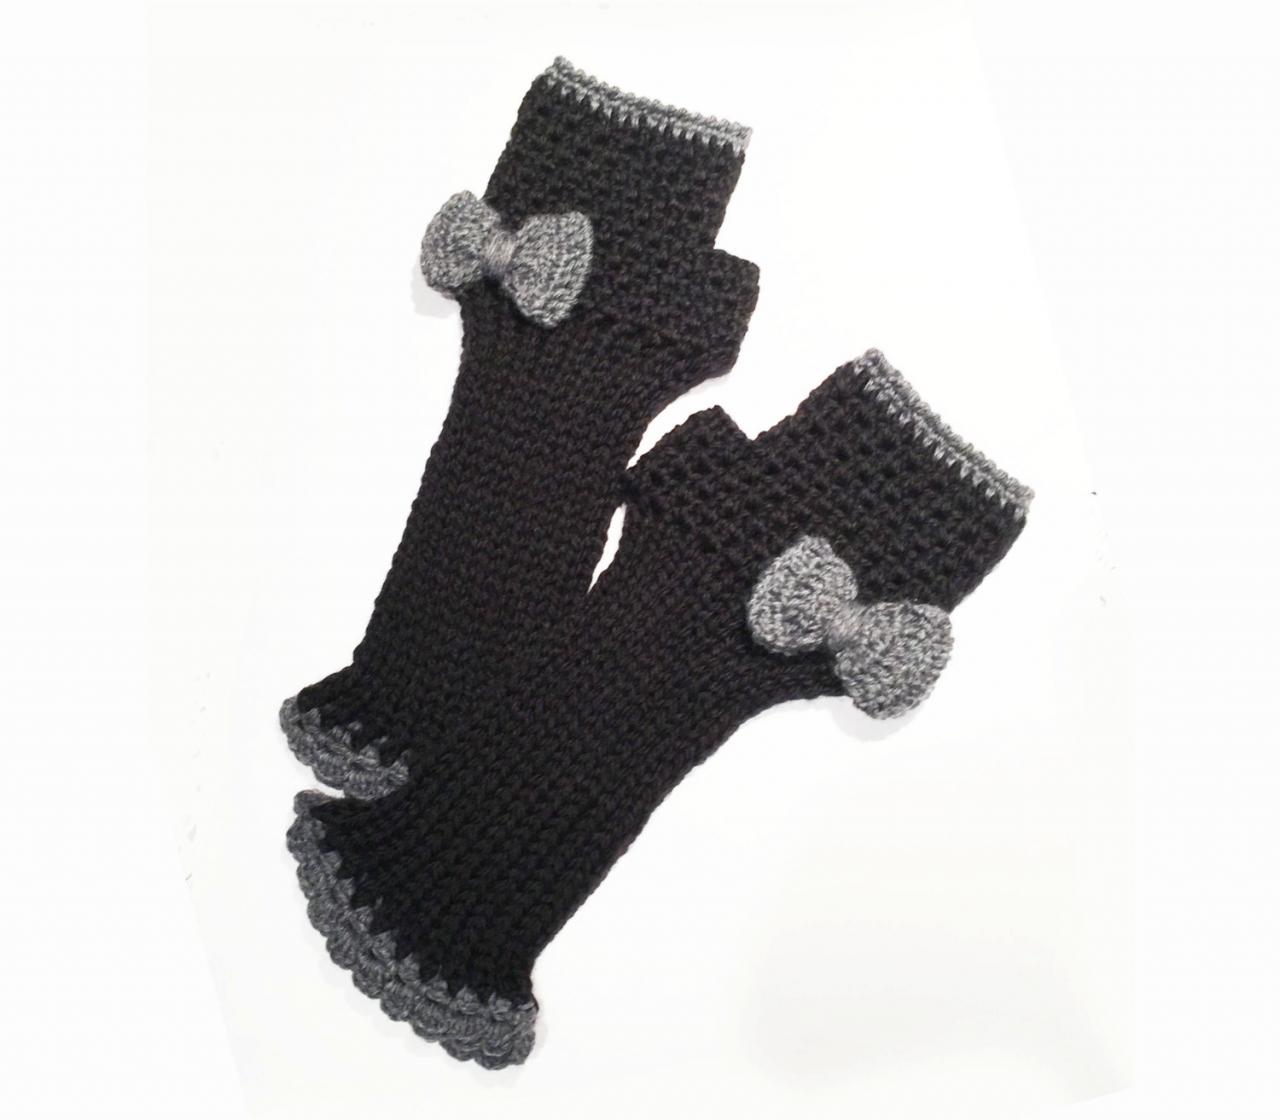 Crochet Fingerless Gloves, Arm Warmers, Mittens, Fingerless Mitts With Bows - Made To Order - Custom Colors - Friskies